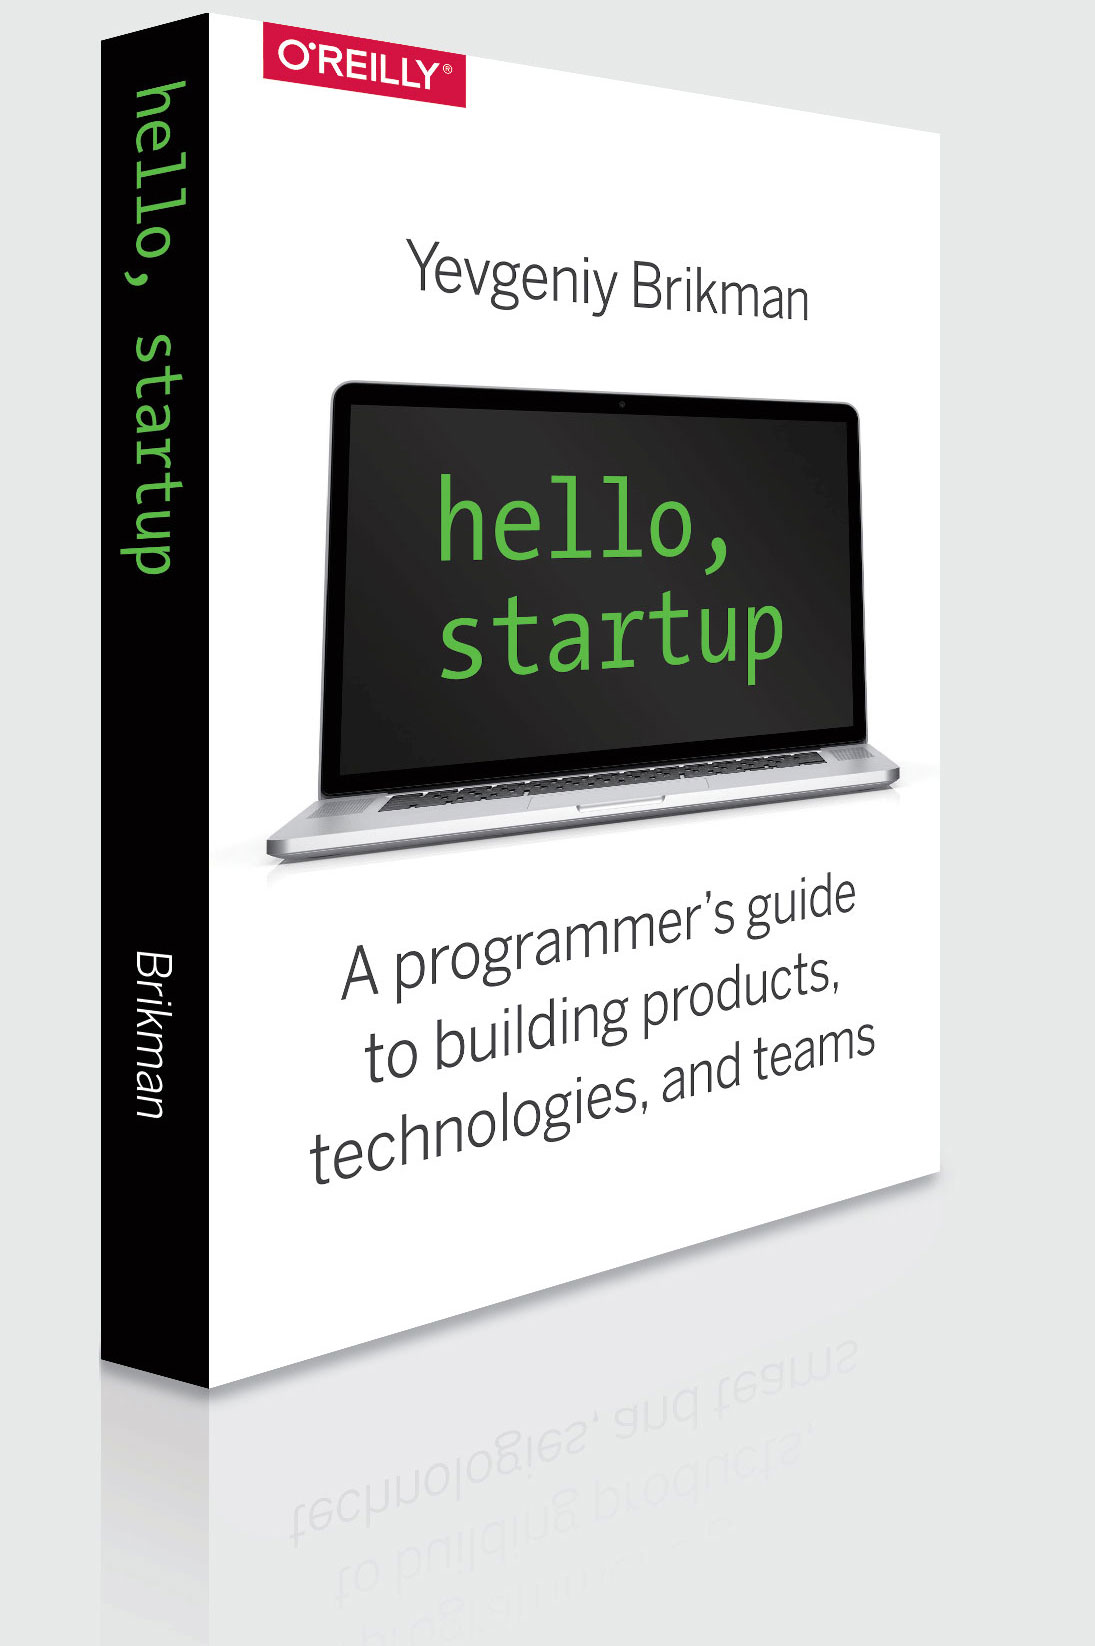 Hello, Startup: A Programmer's Guide to Building Products, Technologies, and Teams -- an O'Reilly book by Yevgeniy Brikman.